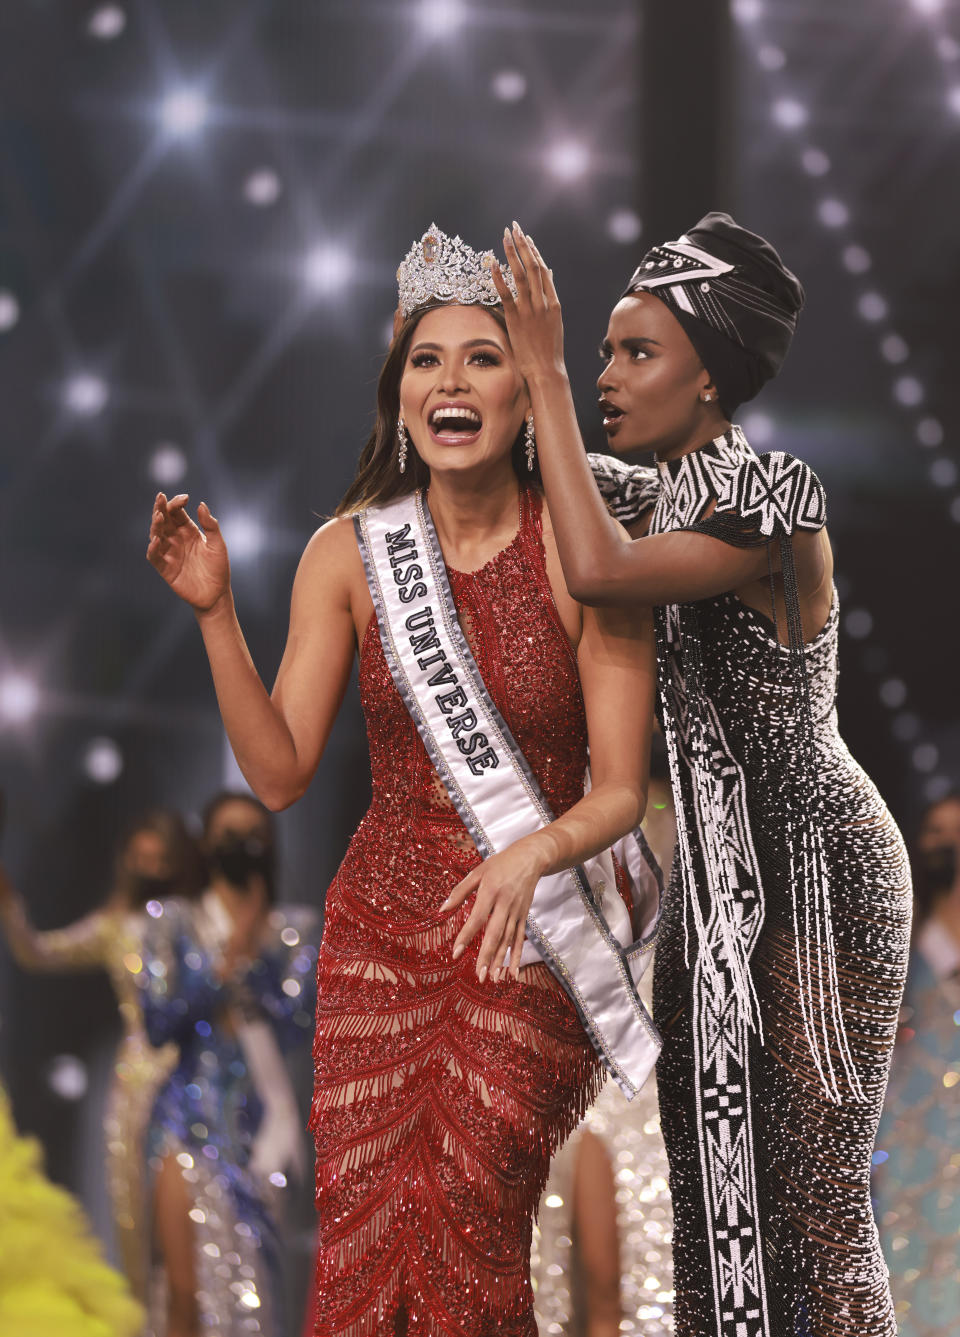 This image released by Miss Universe Organization shows Miss Universe Mexico 2020 Andrea Meza being crowned Miss Universe by Miss Universe 2019 Zozibini Tunzi at the 69th Miss Universe Competition at the Seminole Hard Rock Hotel & Casino in Hollywood, Fla. on Sunday, May 16, 2021. (Tracy Nguyen/Miss Universe via AP)